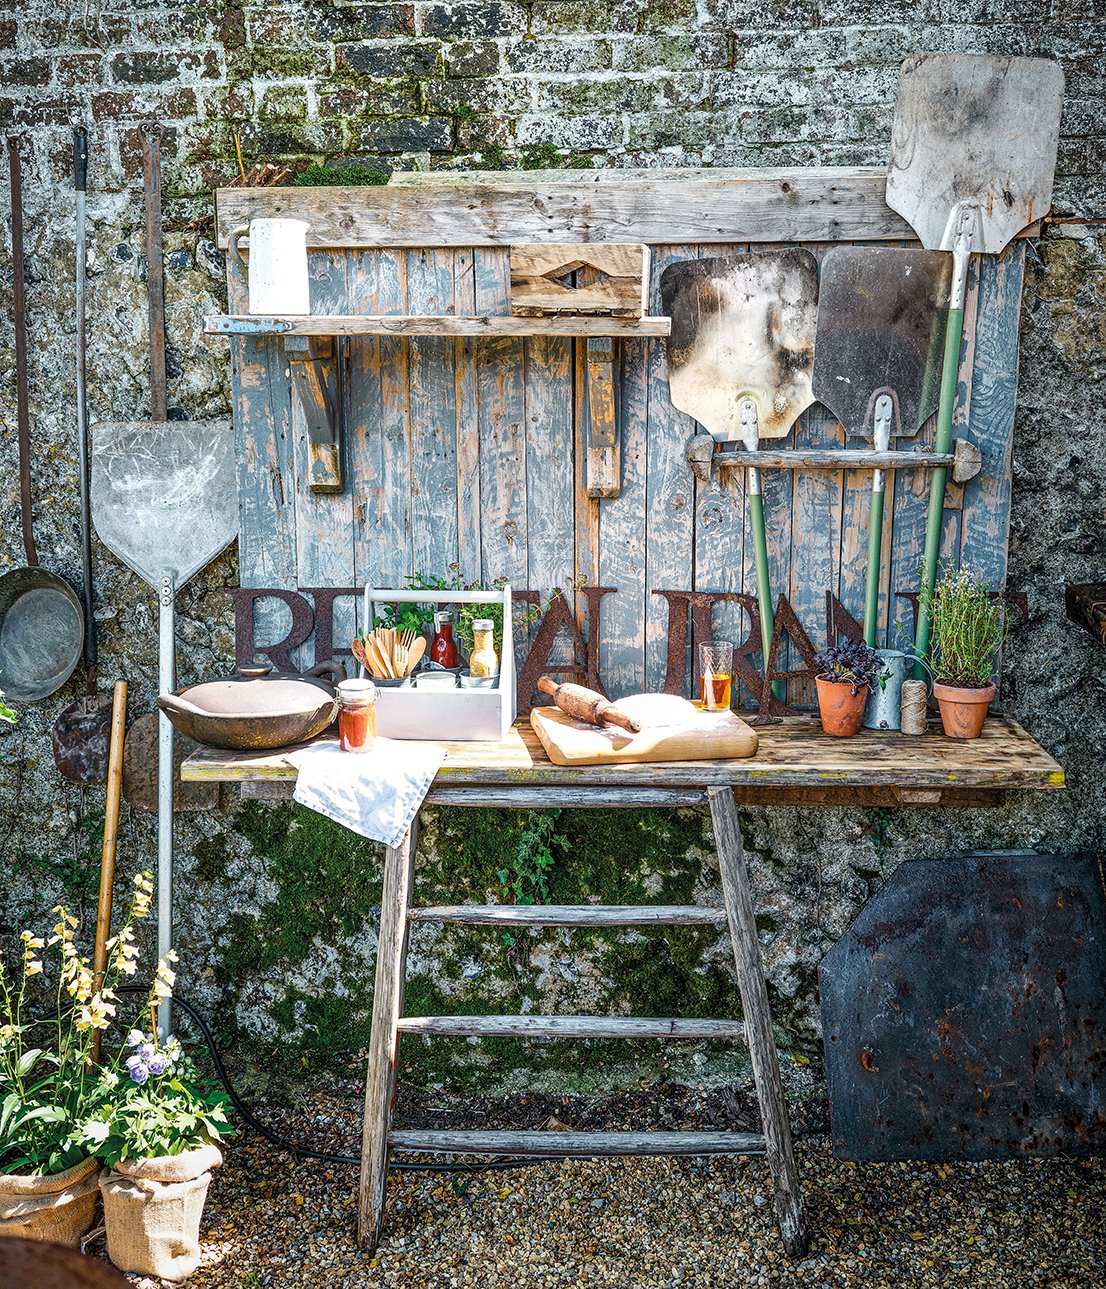 Rustic wooden potting bench